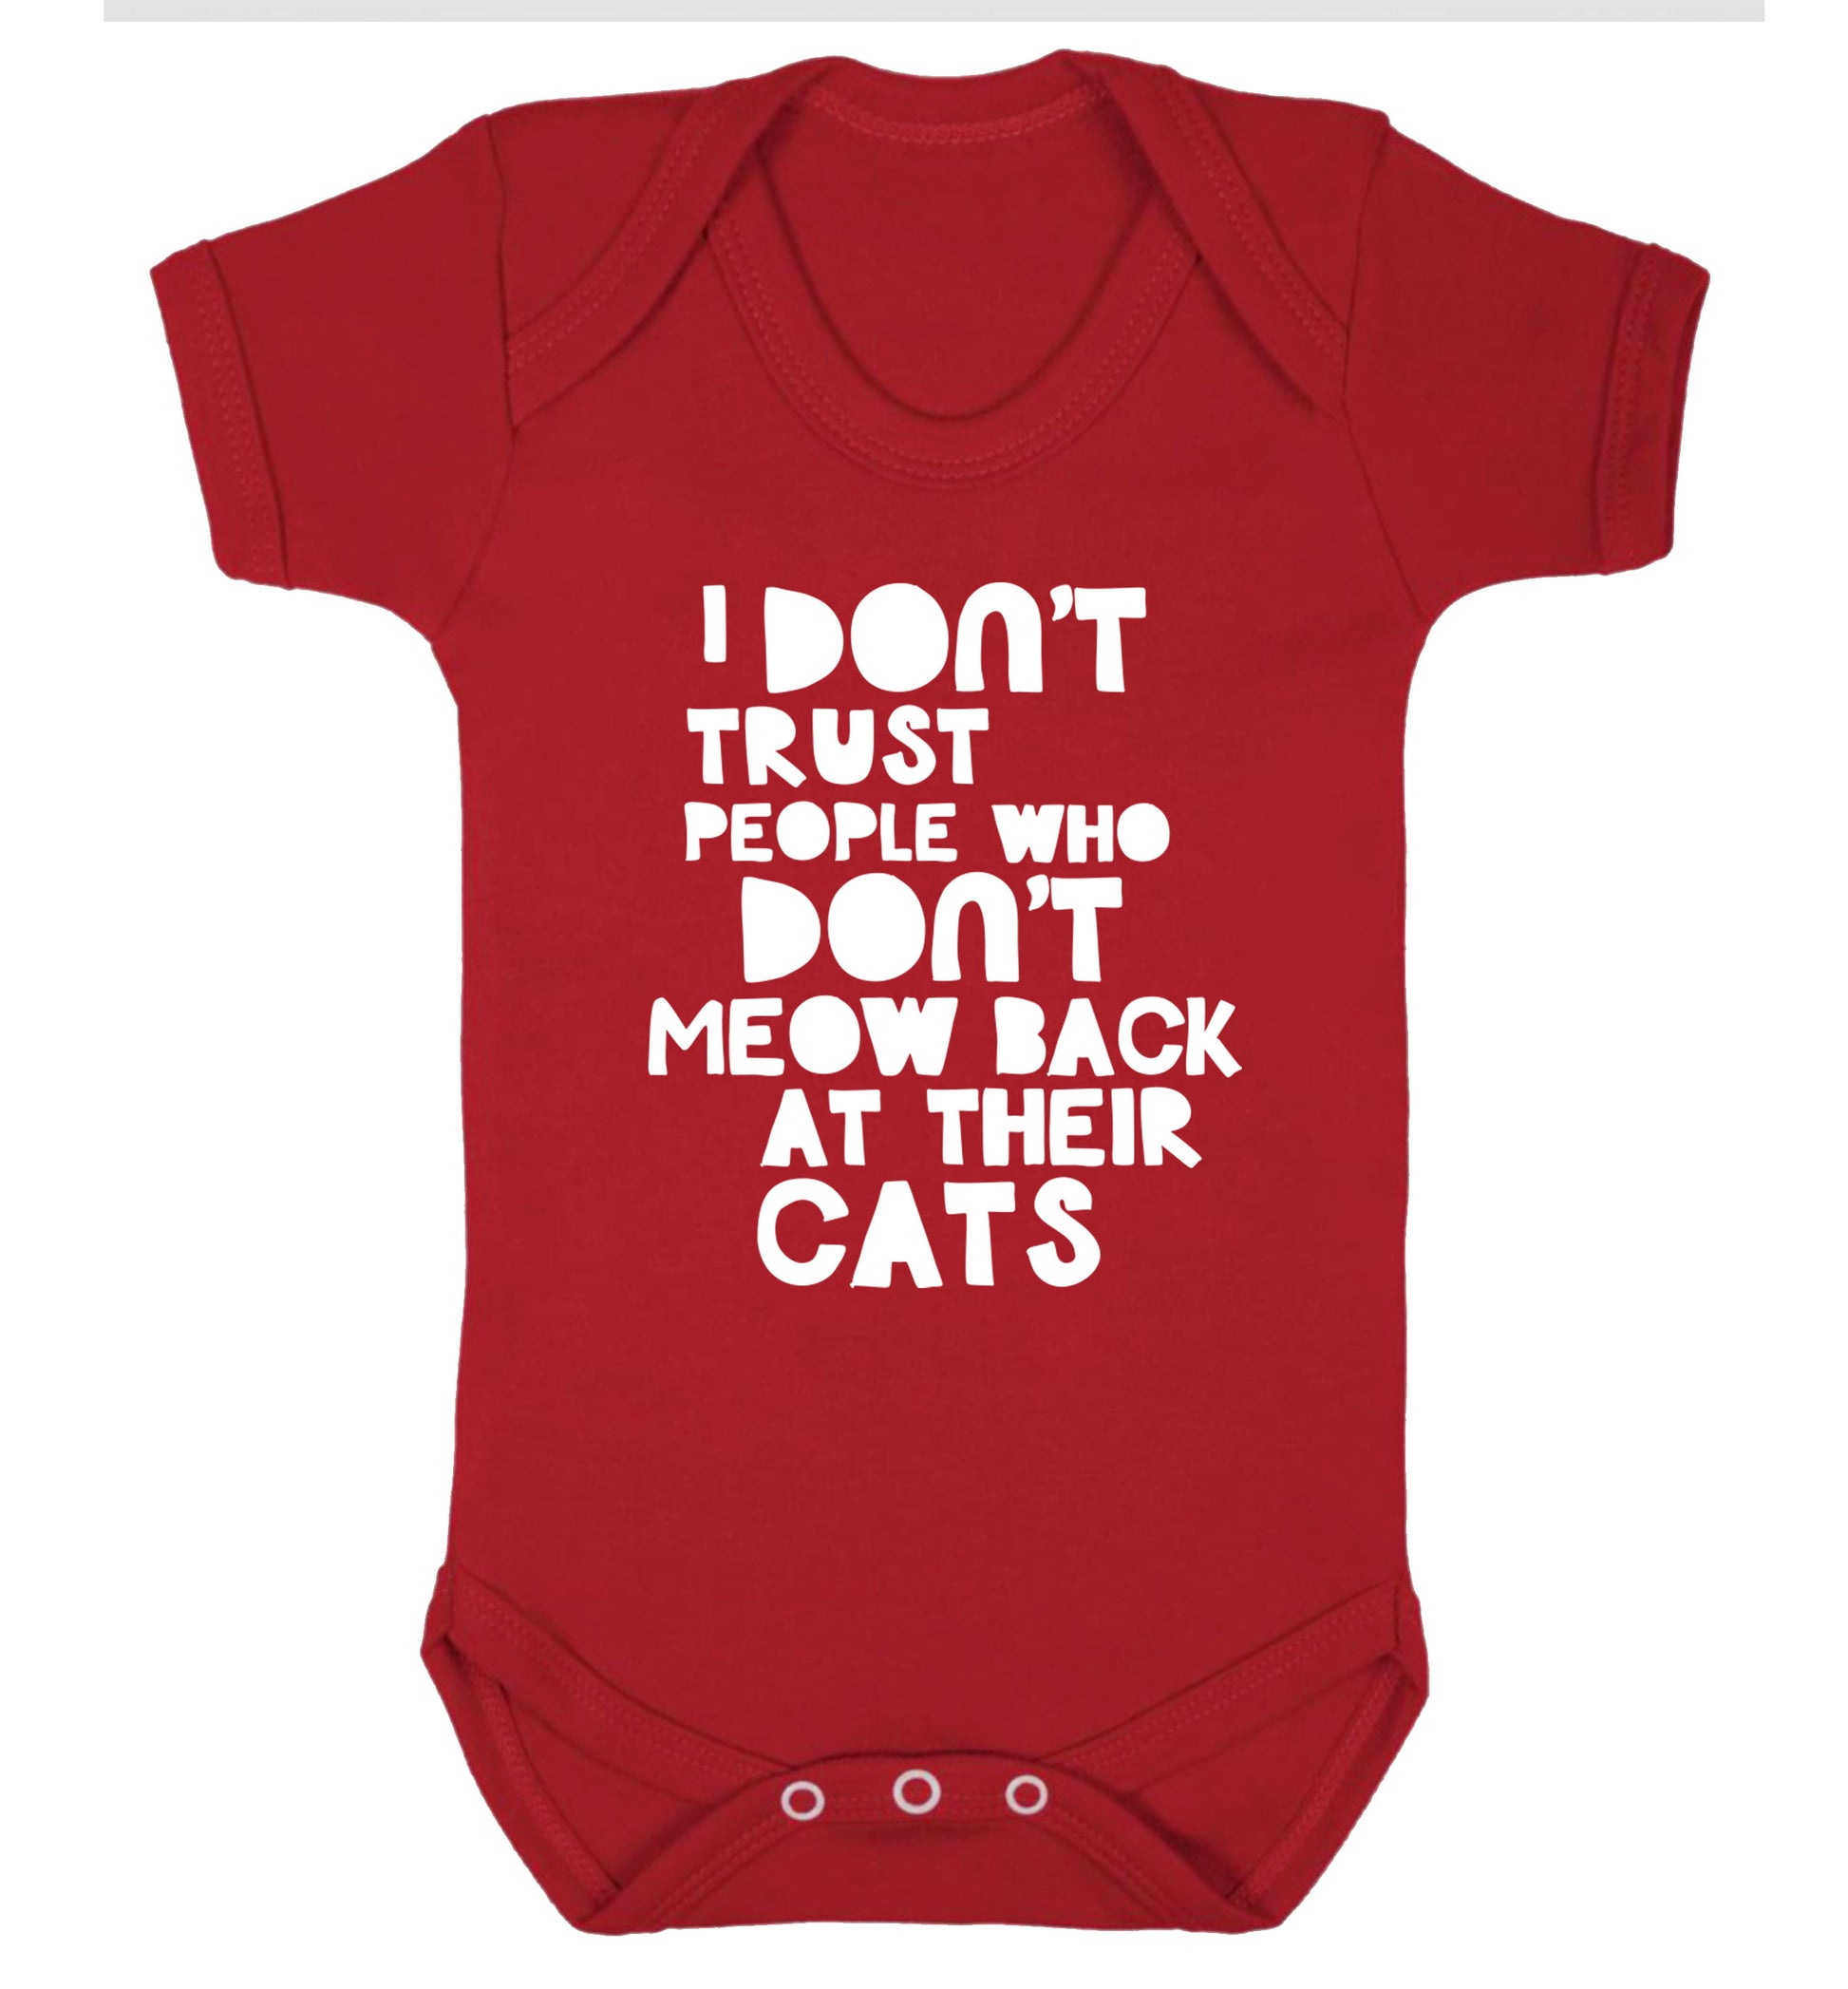 I don't trust people who don't meow back at their cats Baby Vest red 18-24 months